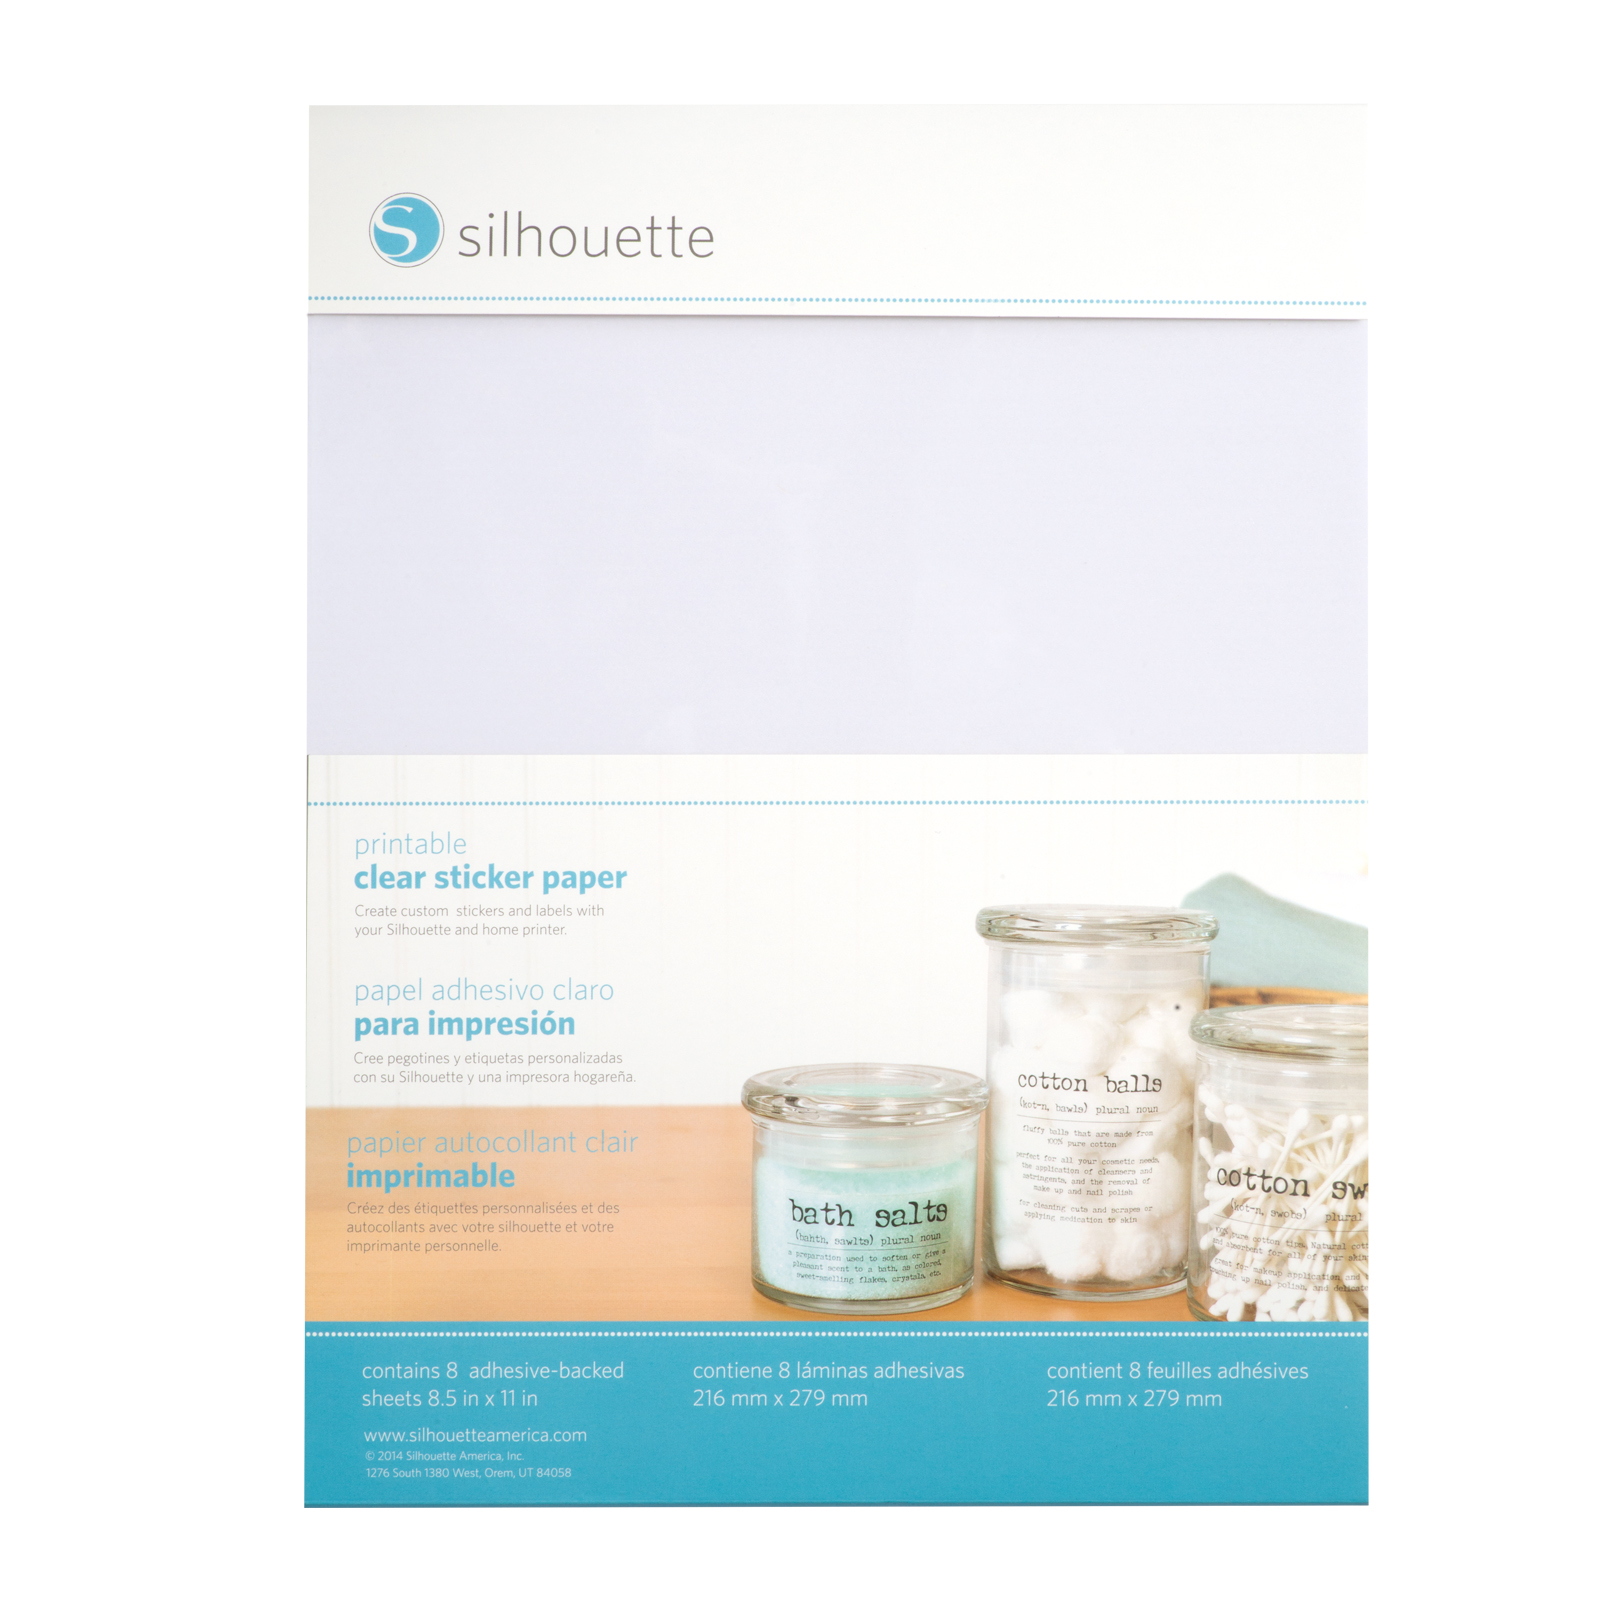 Find the Silhouette® Printable Clear Sticker Paper at Michaels